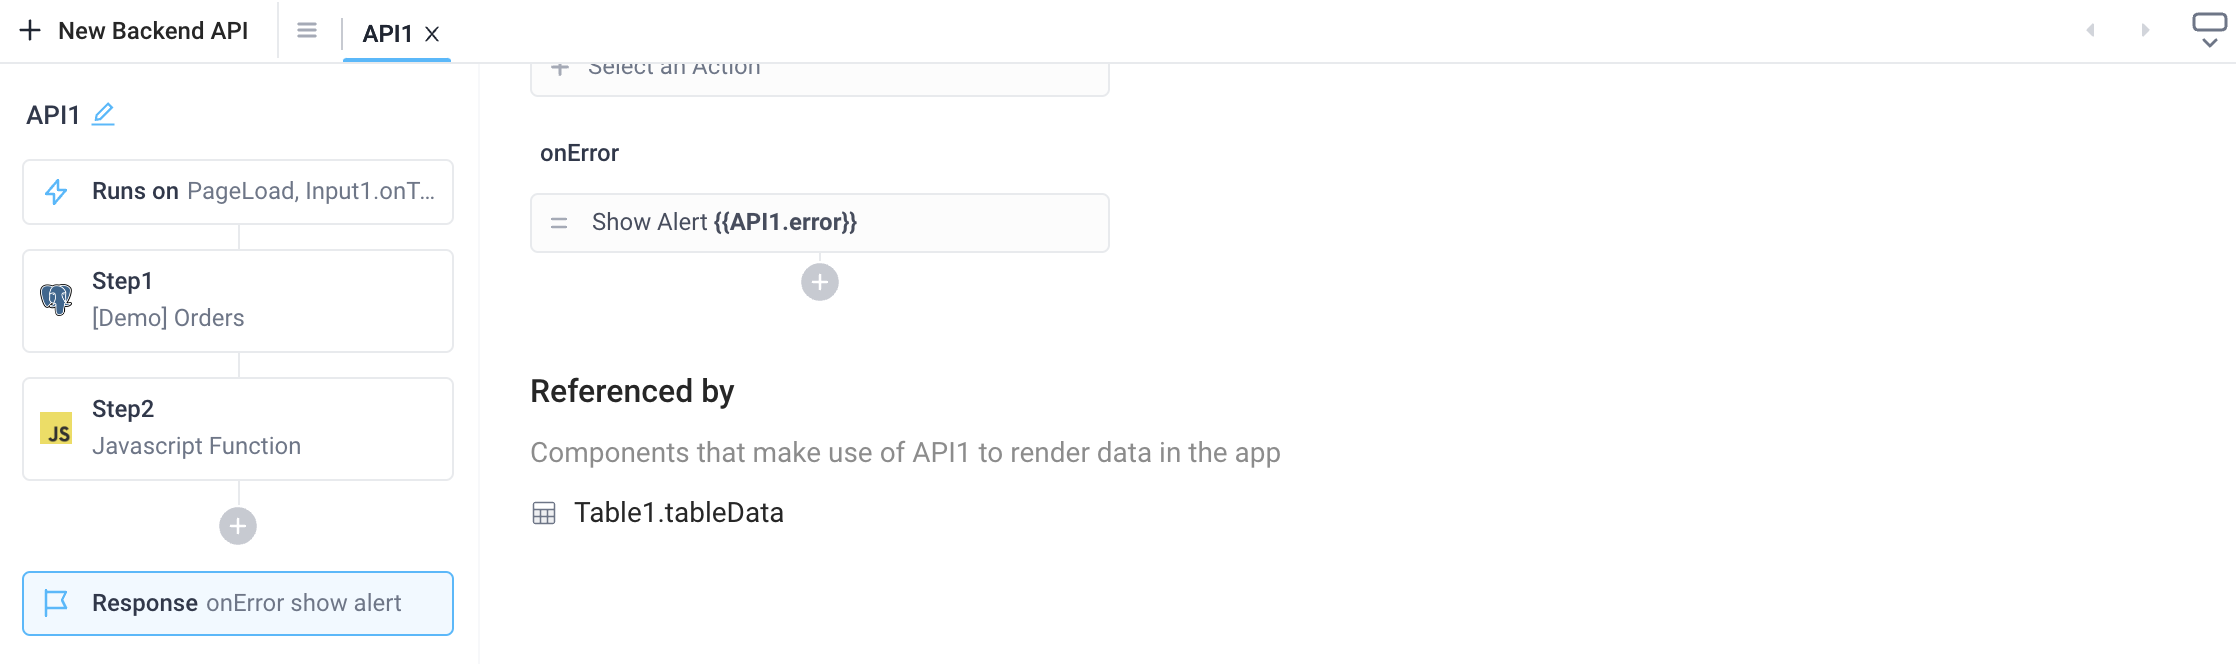 The **Referenced In** section lists all frontend components that reference a backend API